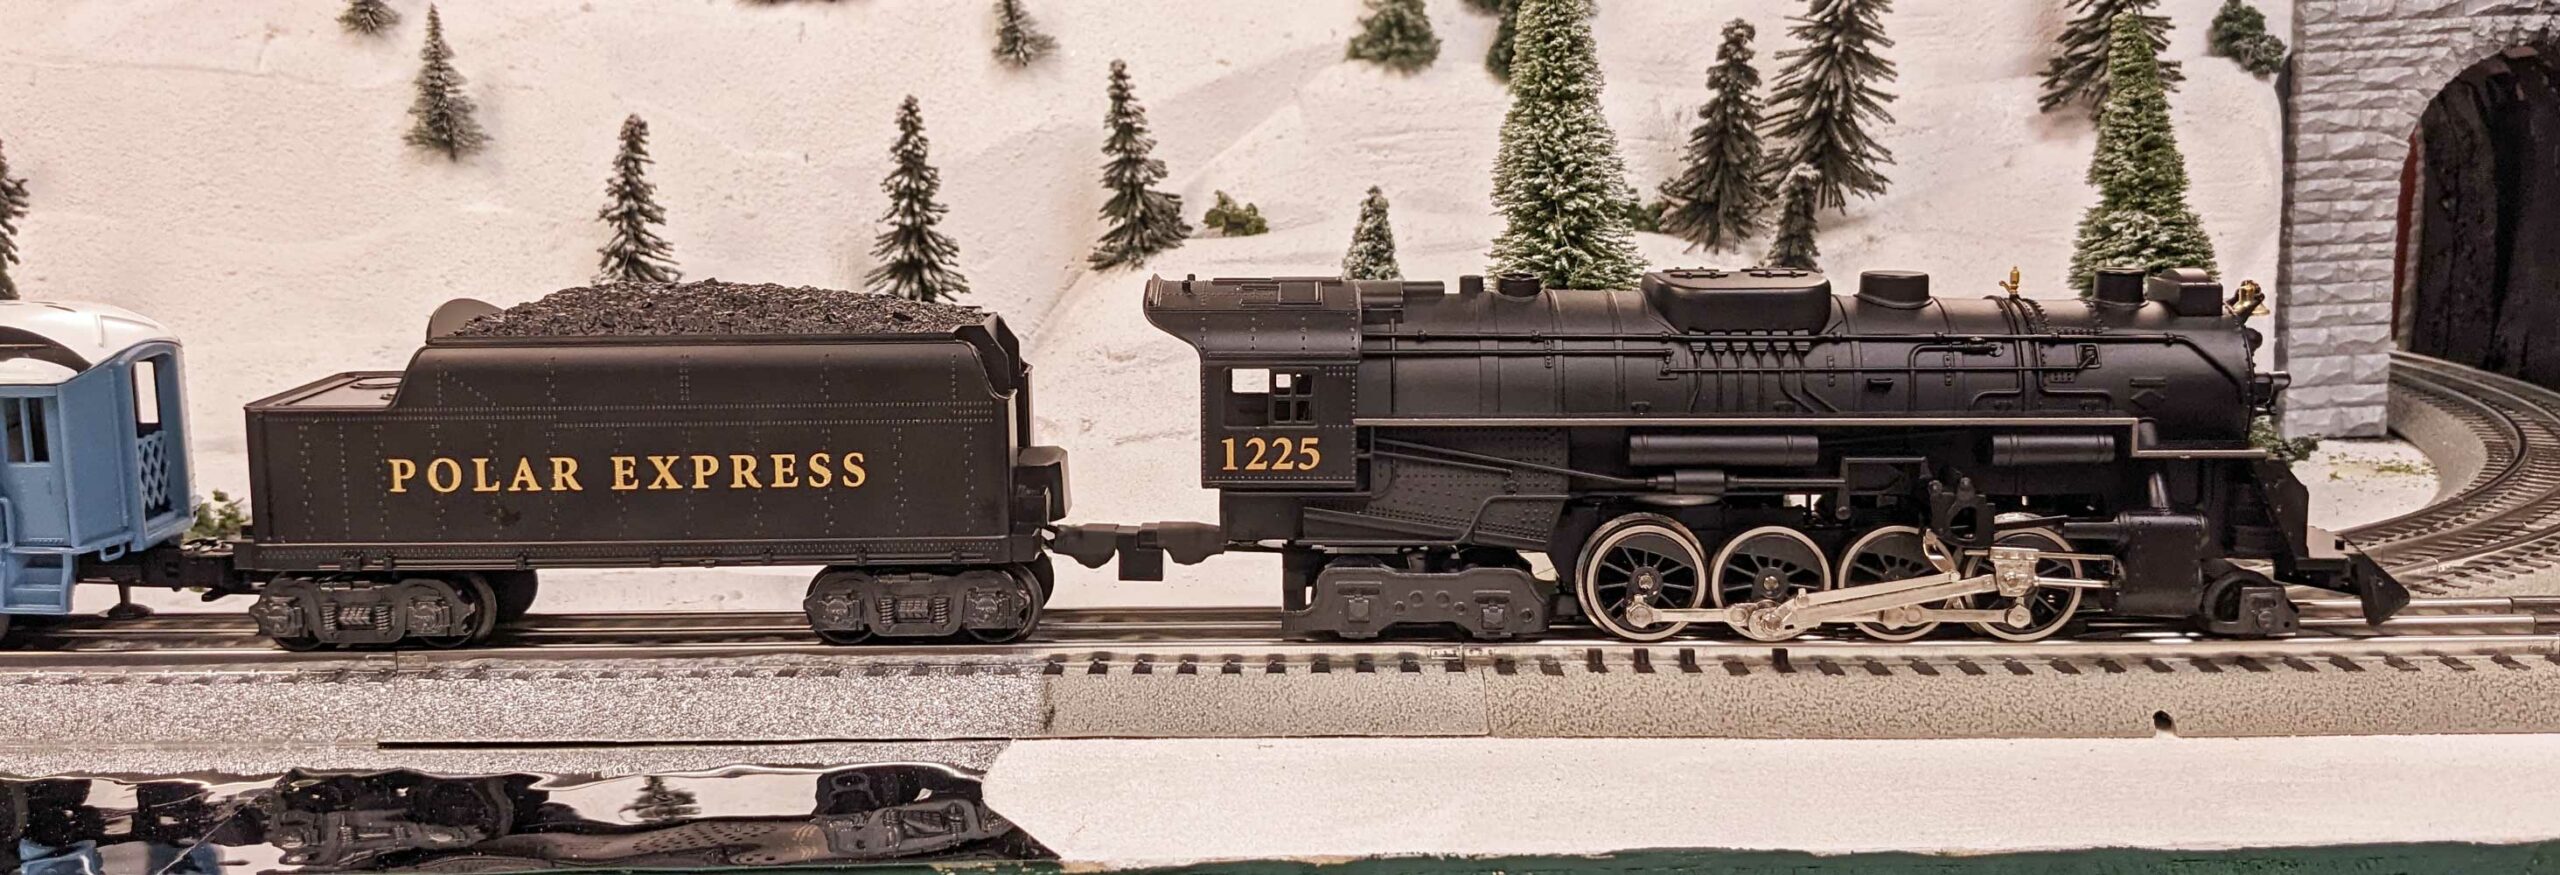 The Polar Express train set from Lionel in O gauge - Trains